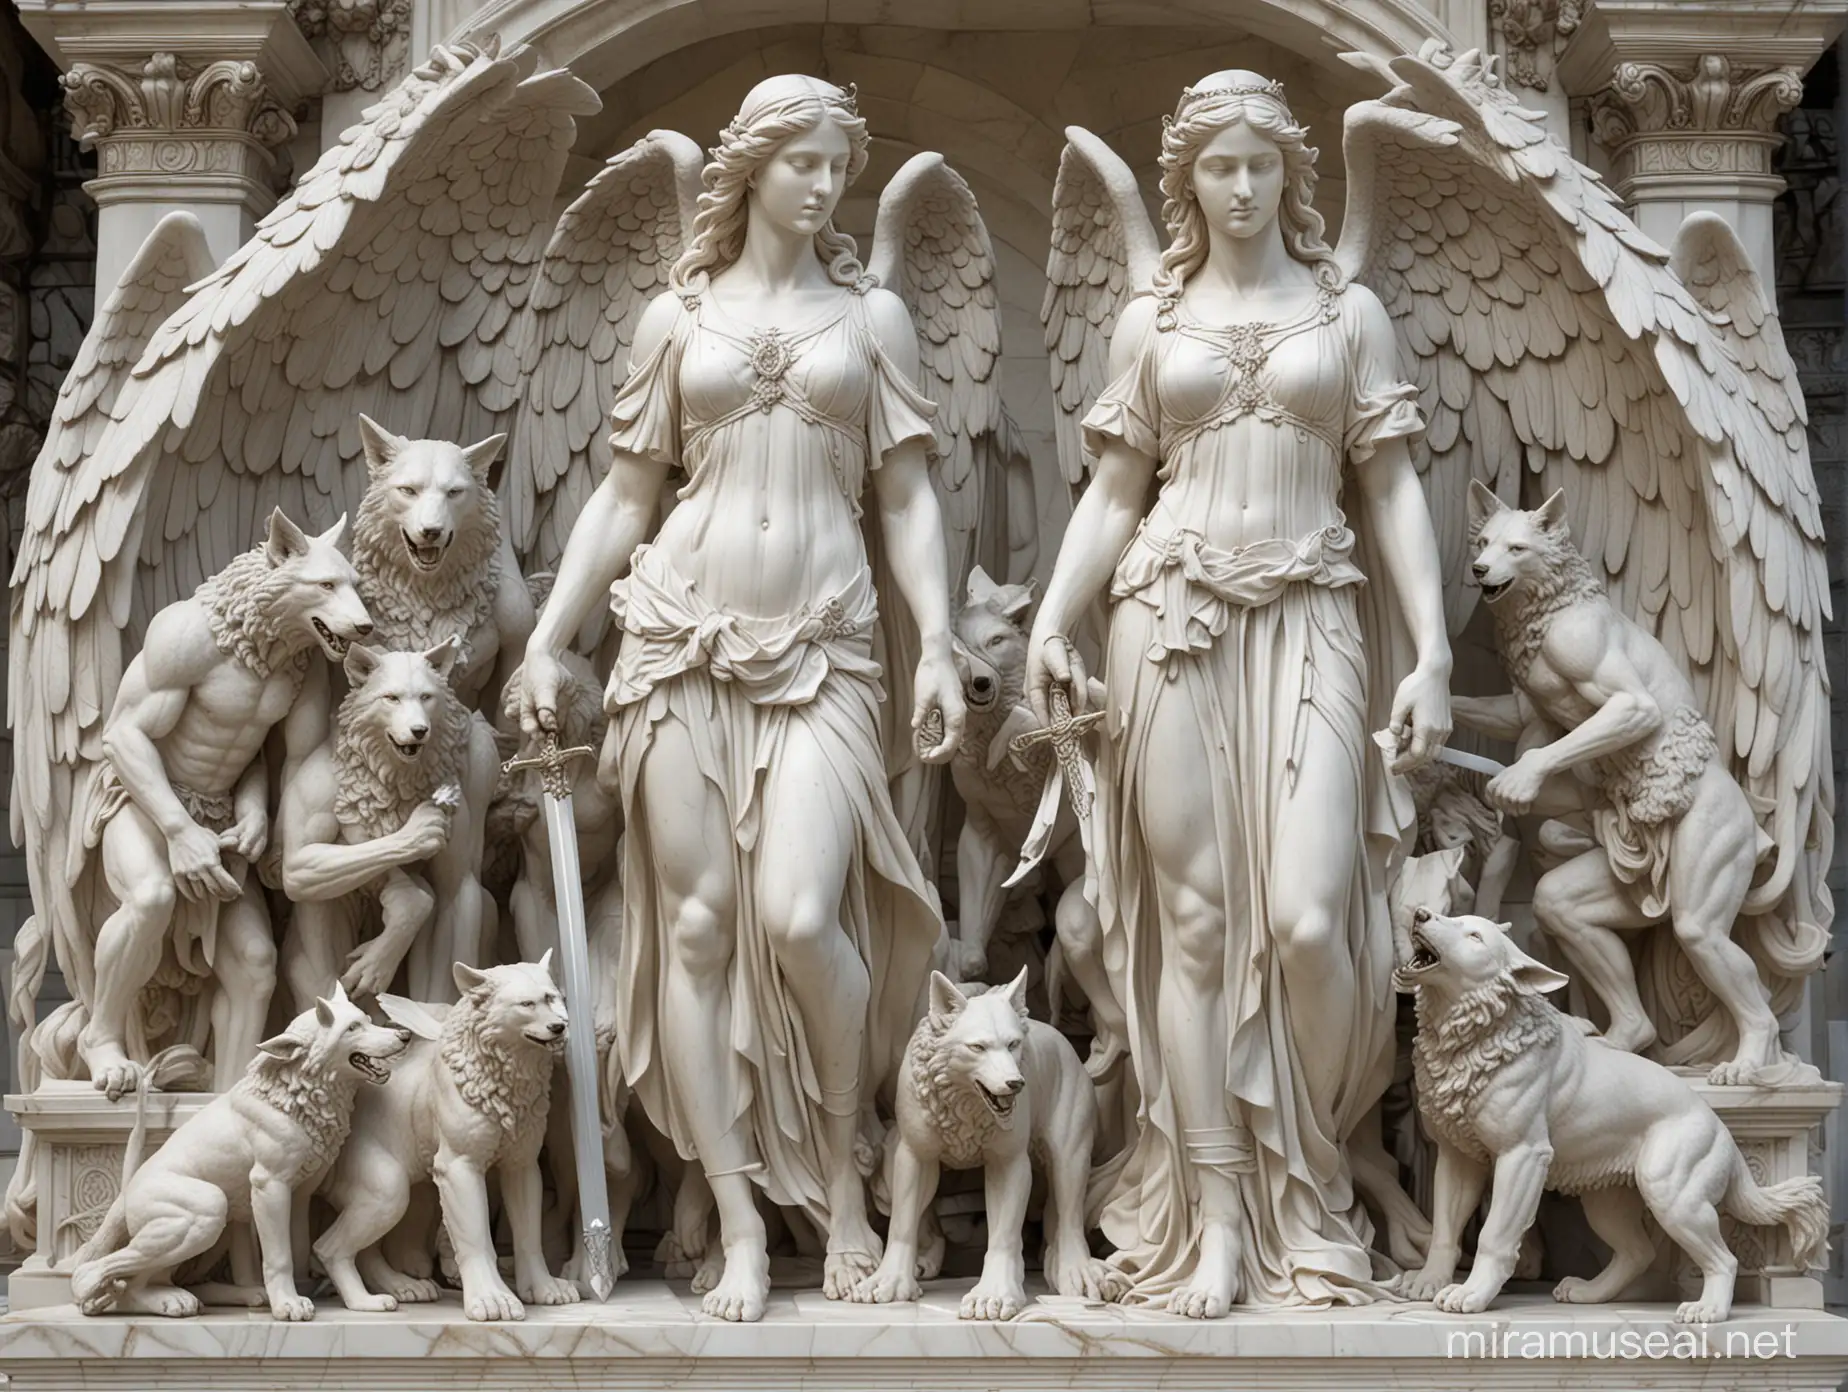 full body, angel holding a from a sword, surrounded by werewolves, marble image sculpture
